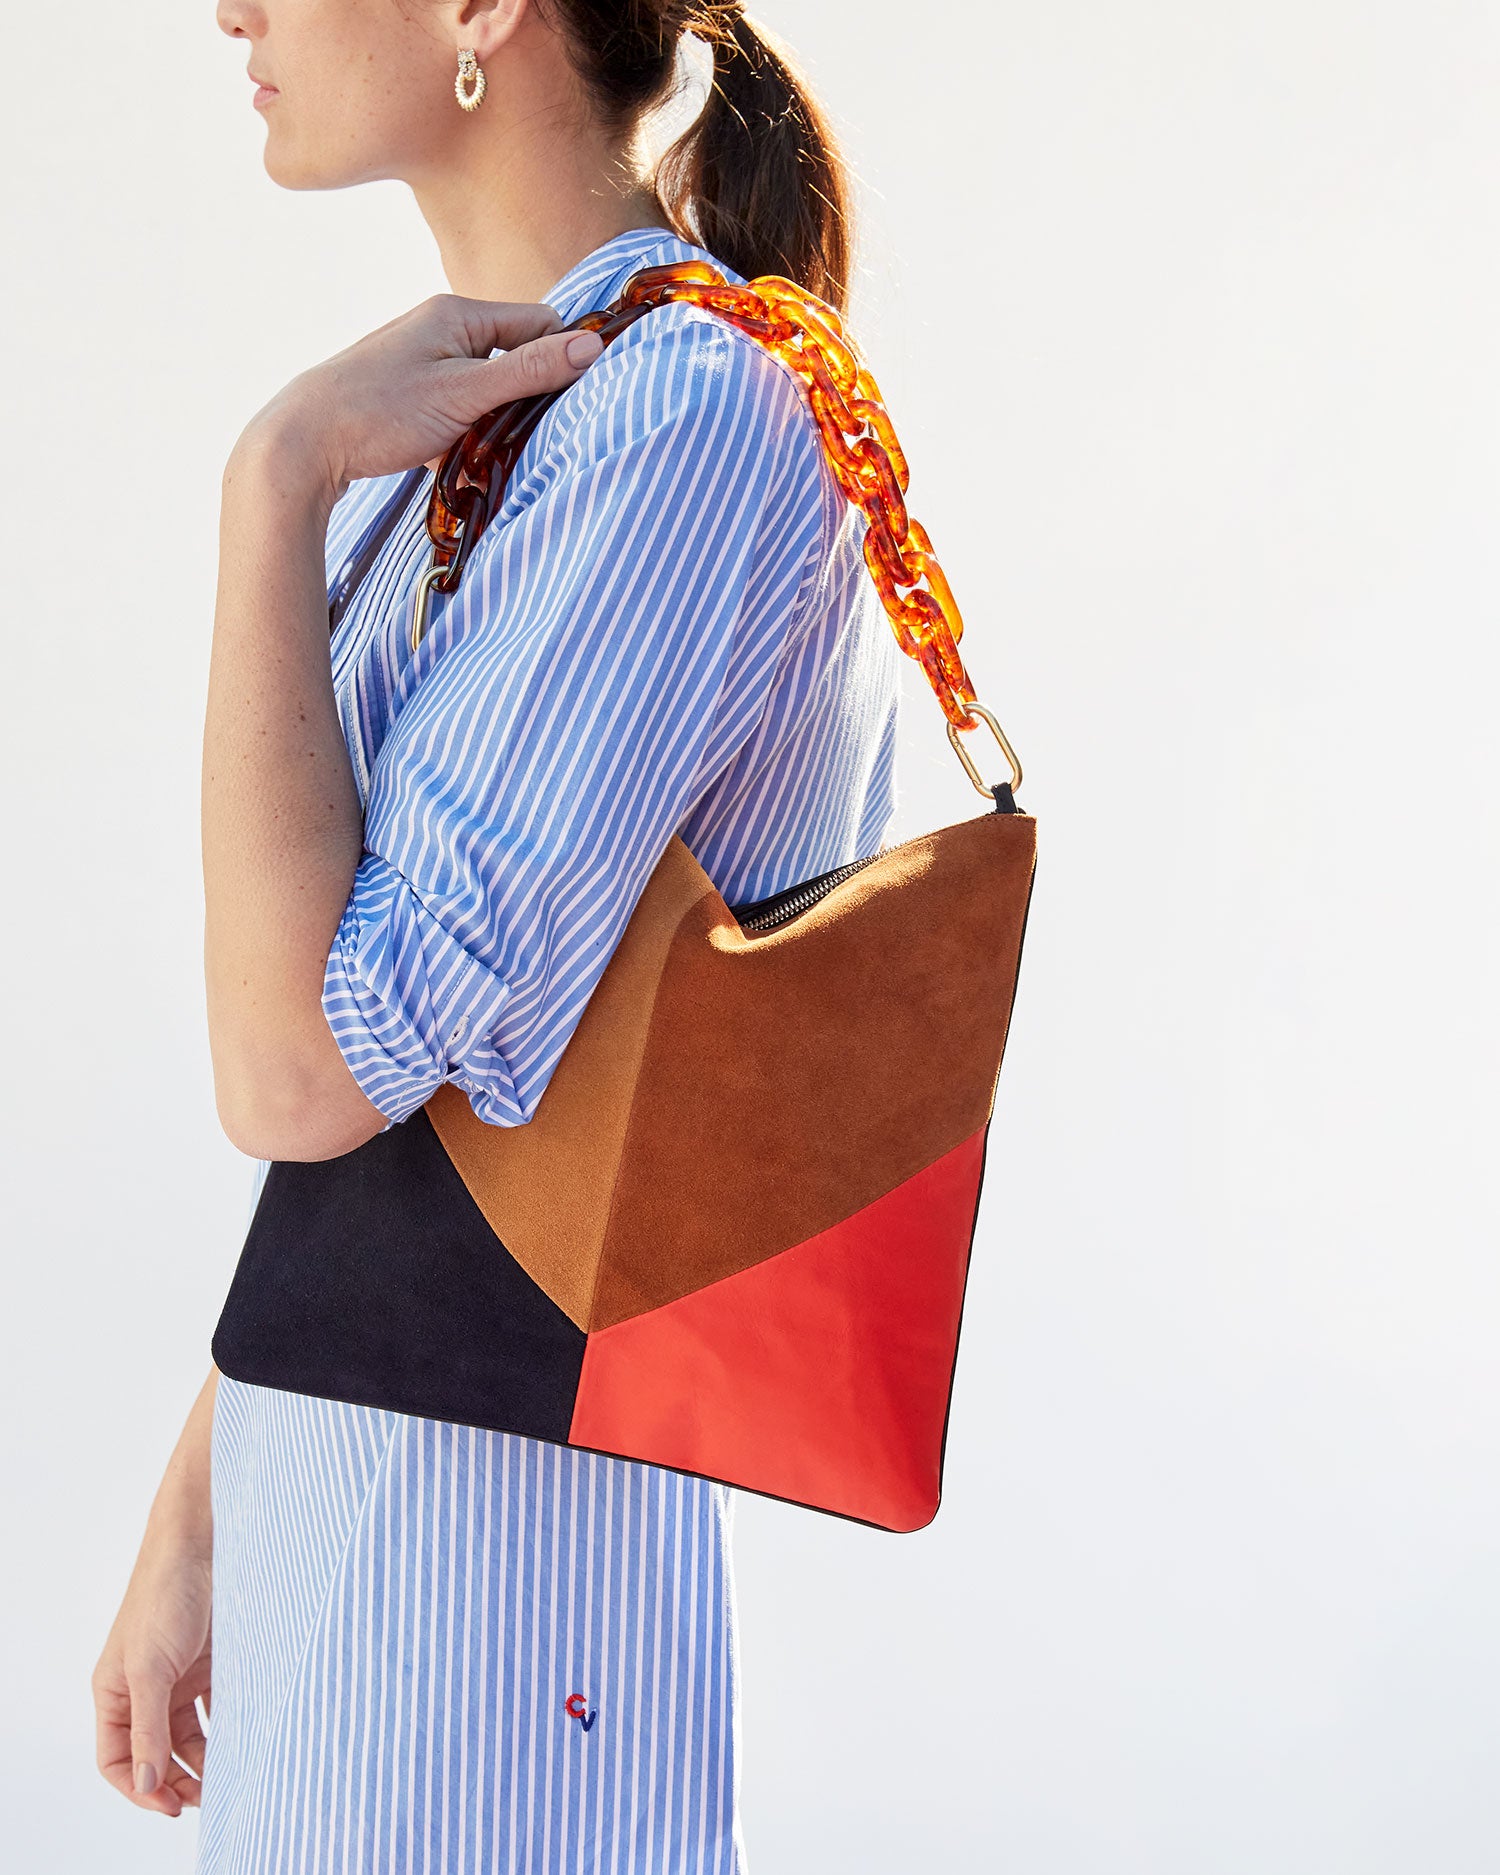 Danica holding the Suede & Nappa Patchwork Foldover Clutch with Tabs on her shoulder by the tortoise resin shortie strap 